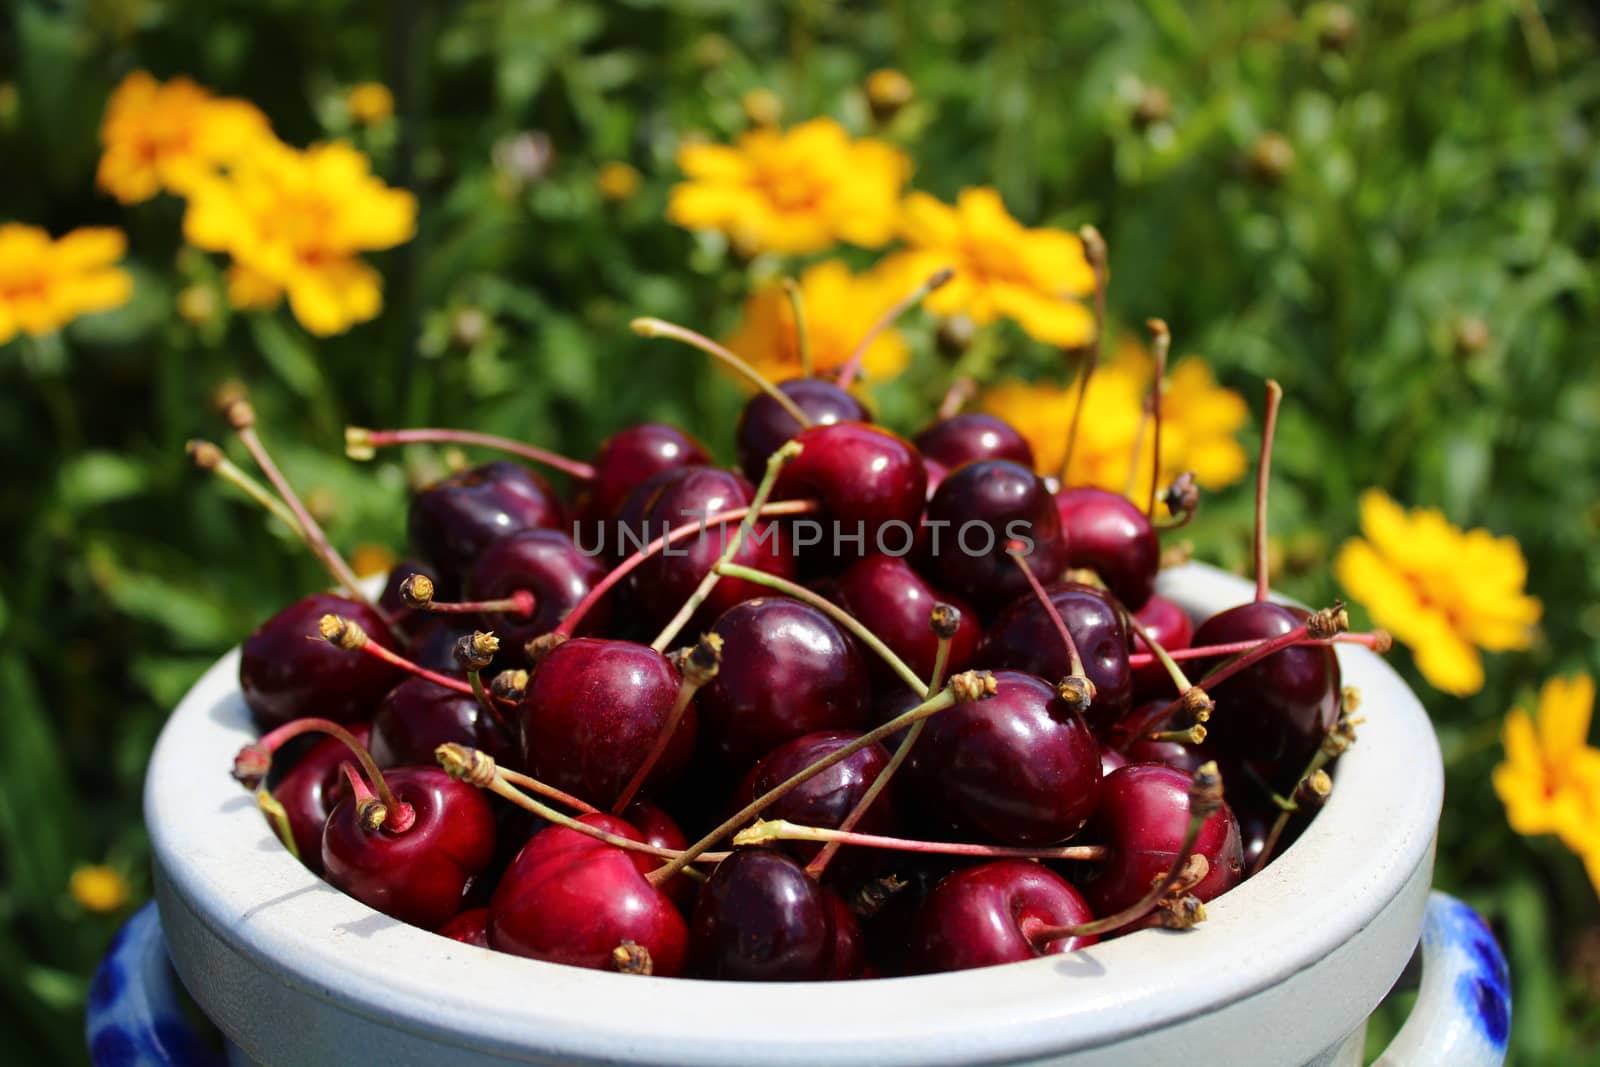 The picture shows harvested cherries in the garden